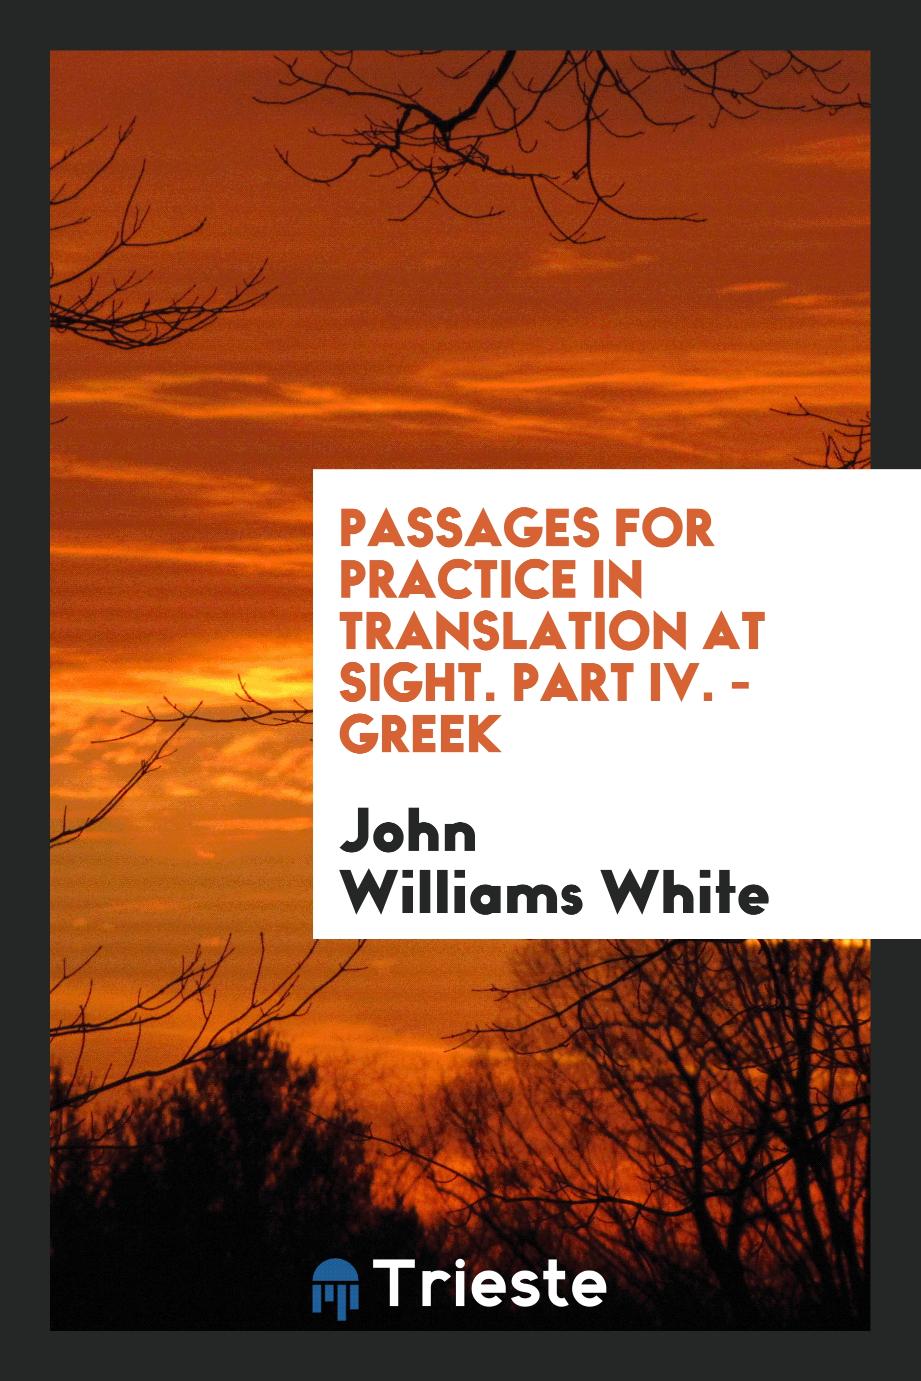 Passages for Practice in Translation at Sight. Part IV. - Greek